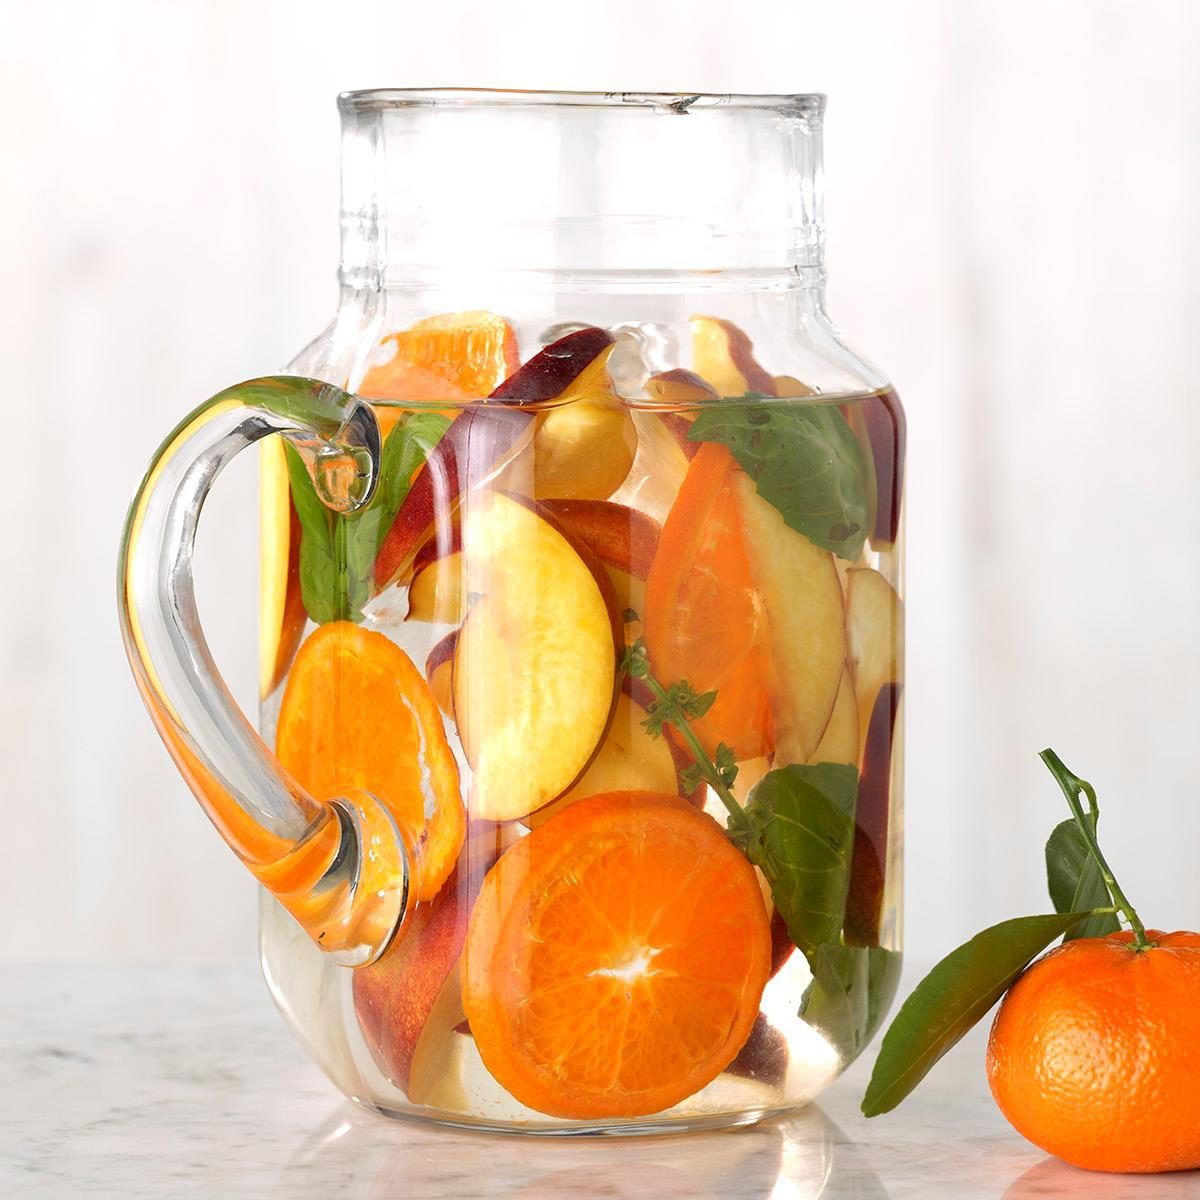 Nectarine, Basil and Clementine Infused Water Recipe: How to Make It